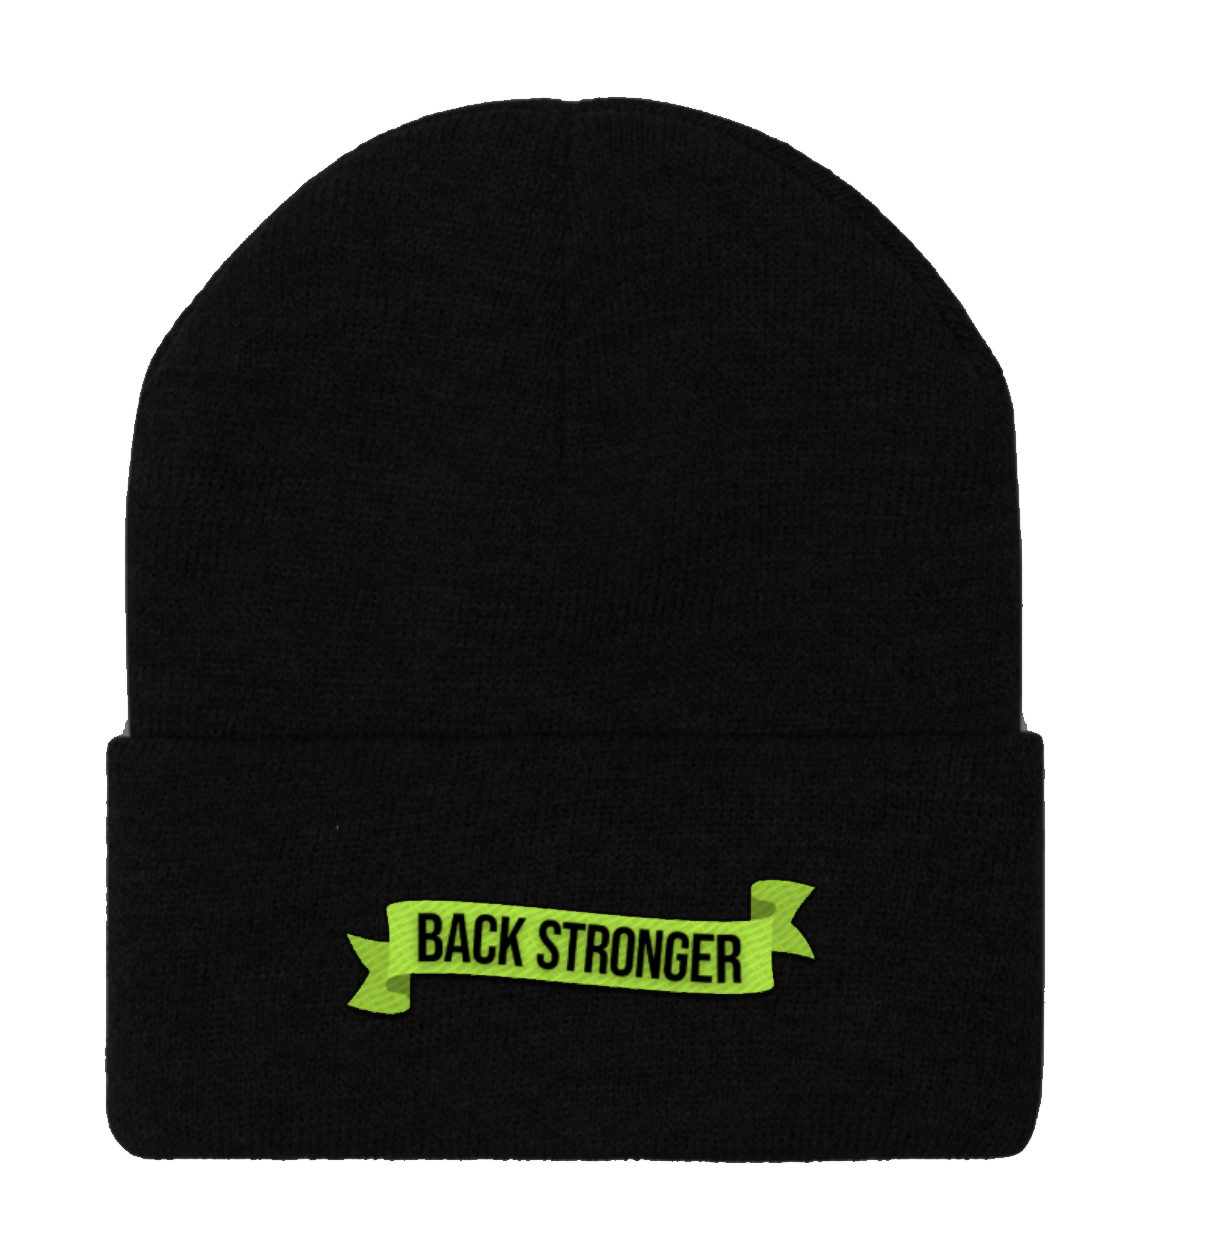 Black Beanie using the Back Stronger design from That Peter Crouch Podcast